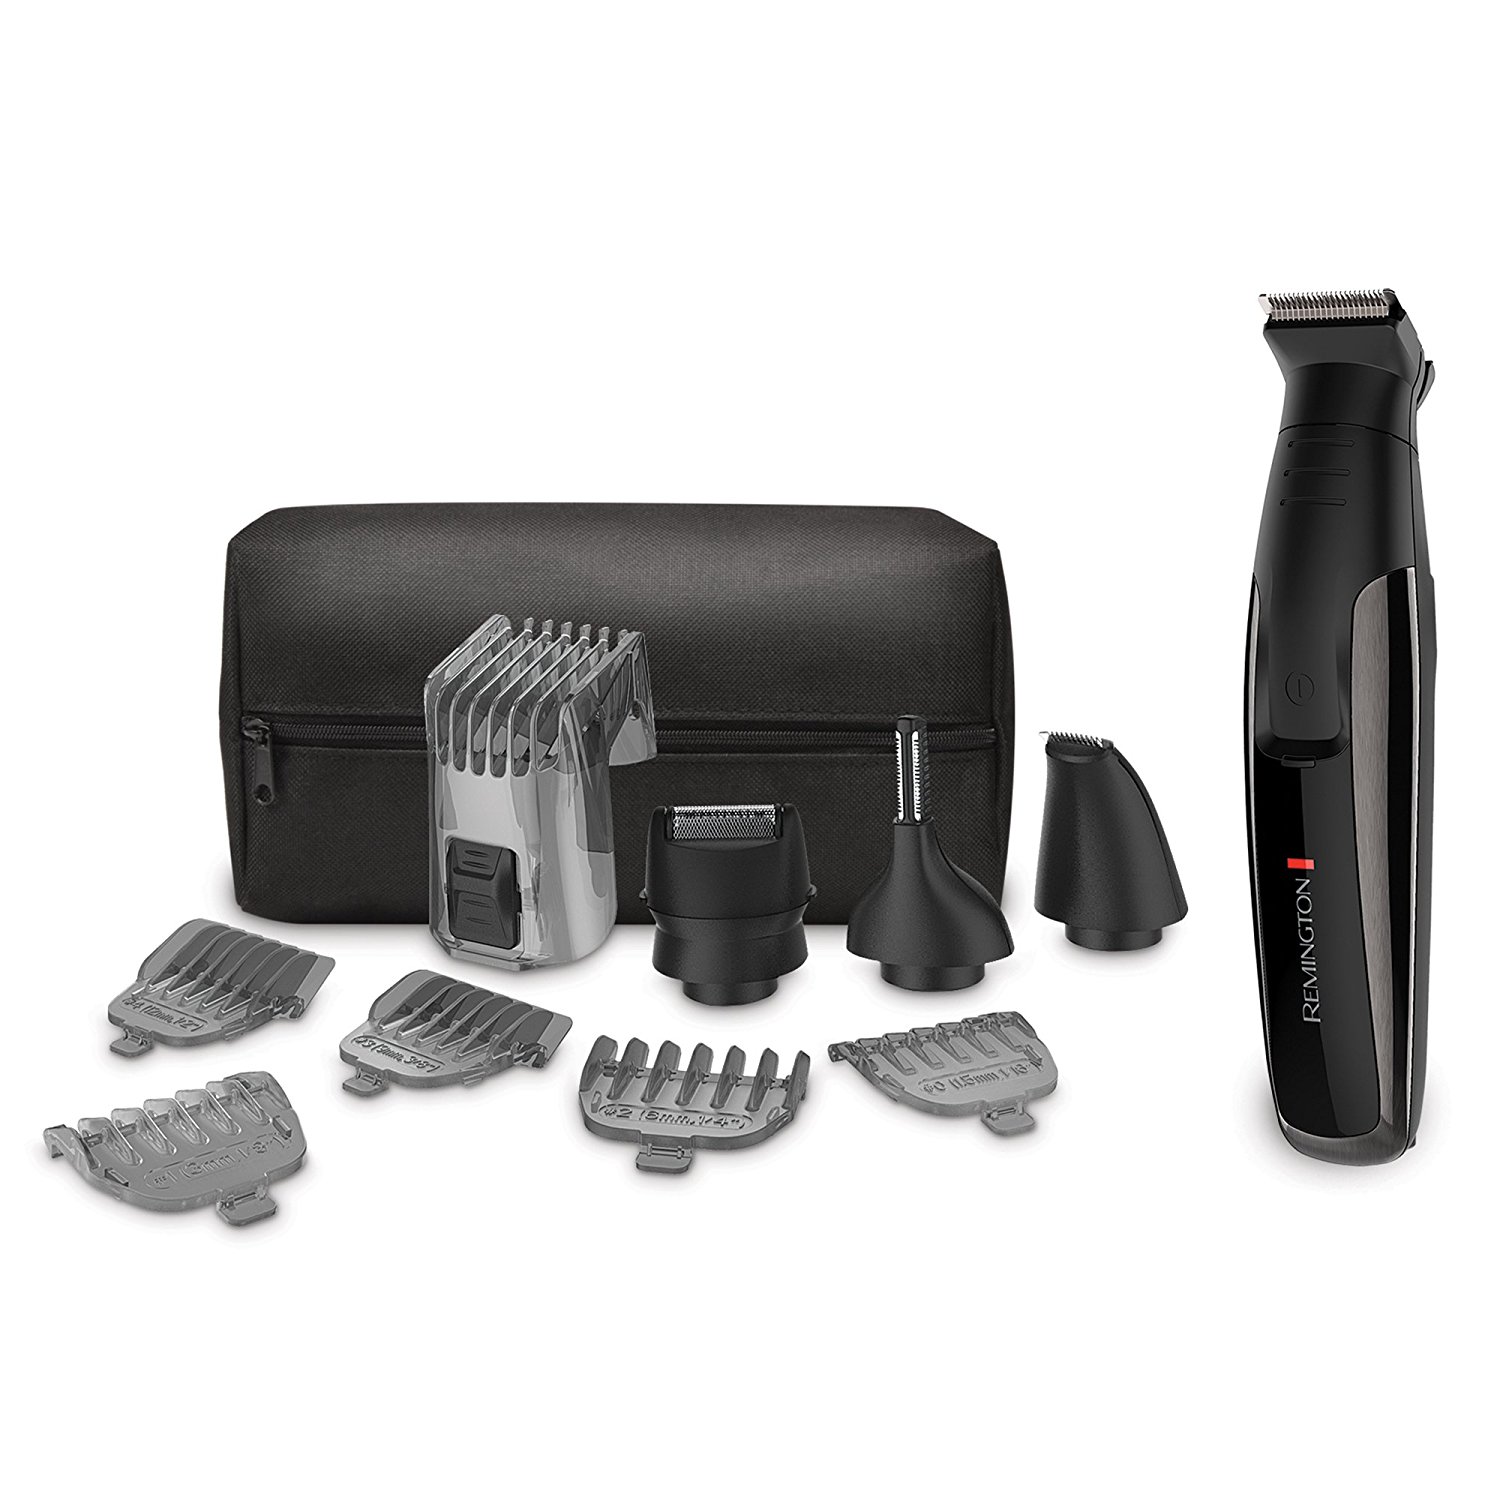 The Remington PG6171 is an 11 piece beard trimming and groomer kit every Dad needs to grow that perfect grey beard. <br/><br/> You can pick this up at  <a href="https://amzn.to/2Iyye8Y">Amazon for about $40</a>.